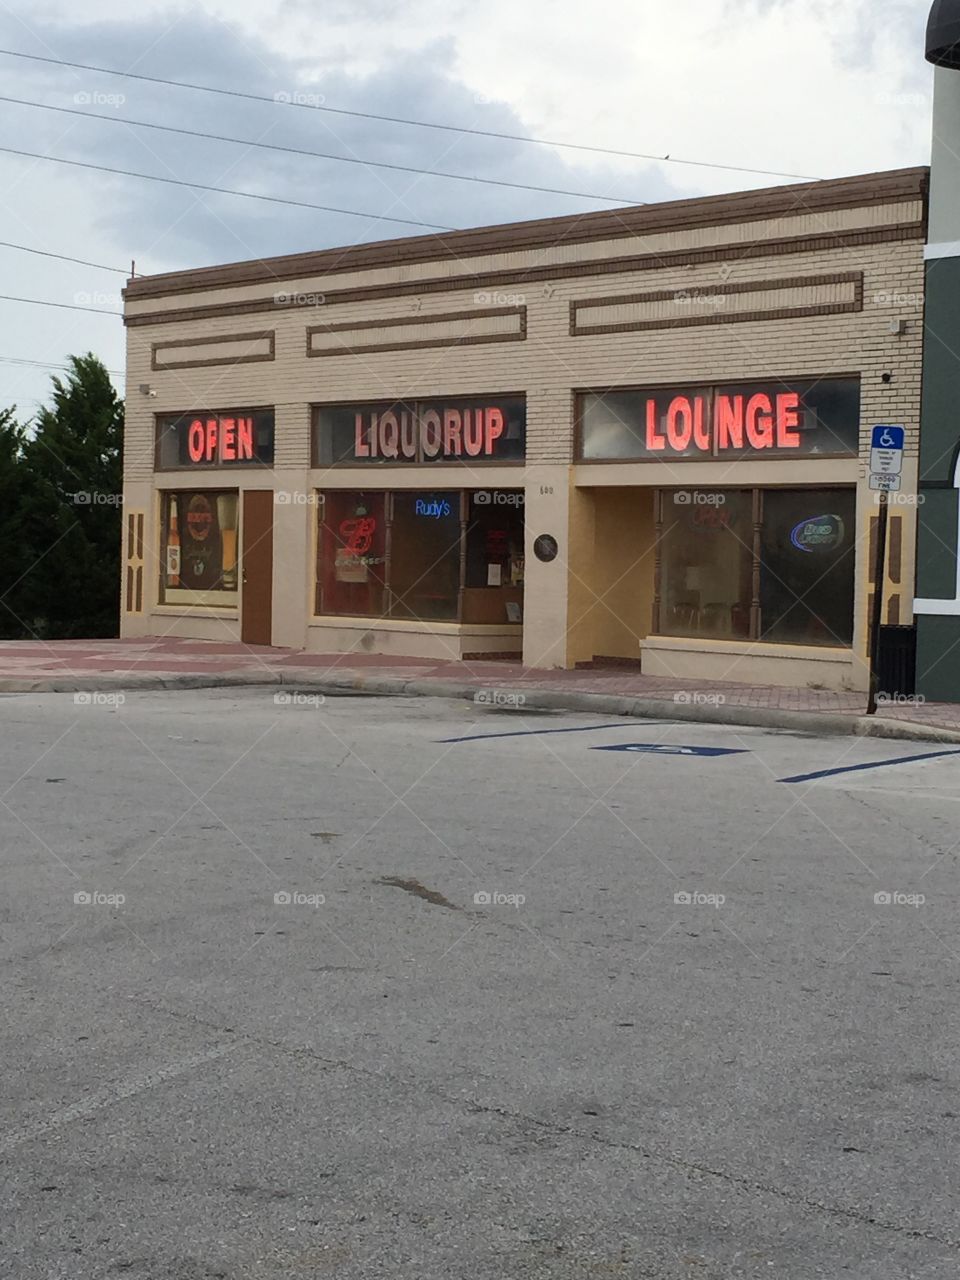 Liquor in Haines City. Sunday afternoon in August 2015 in Haines City, Florida.